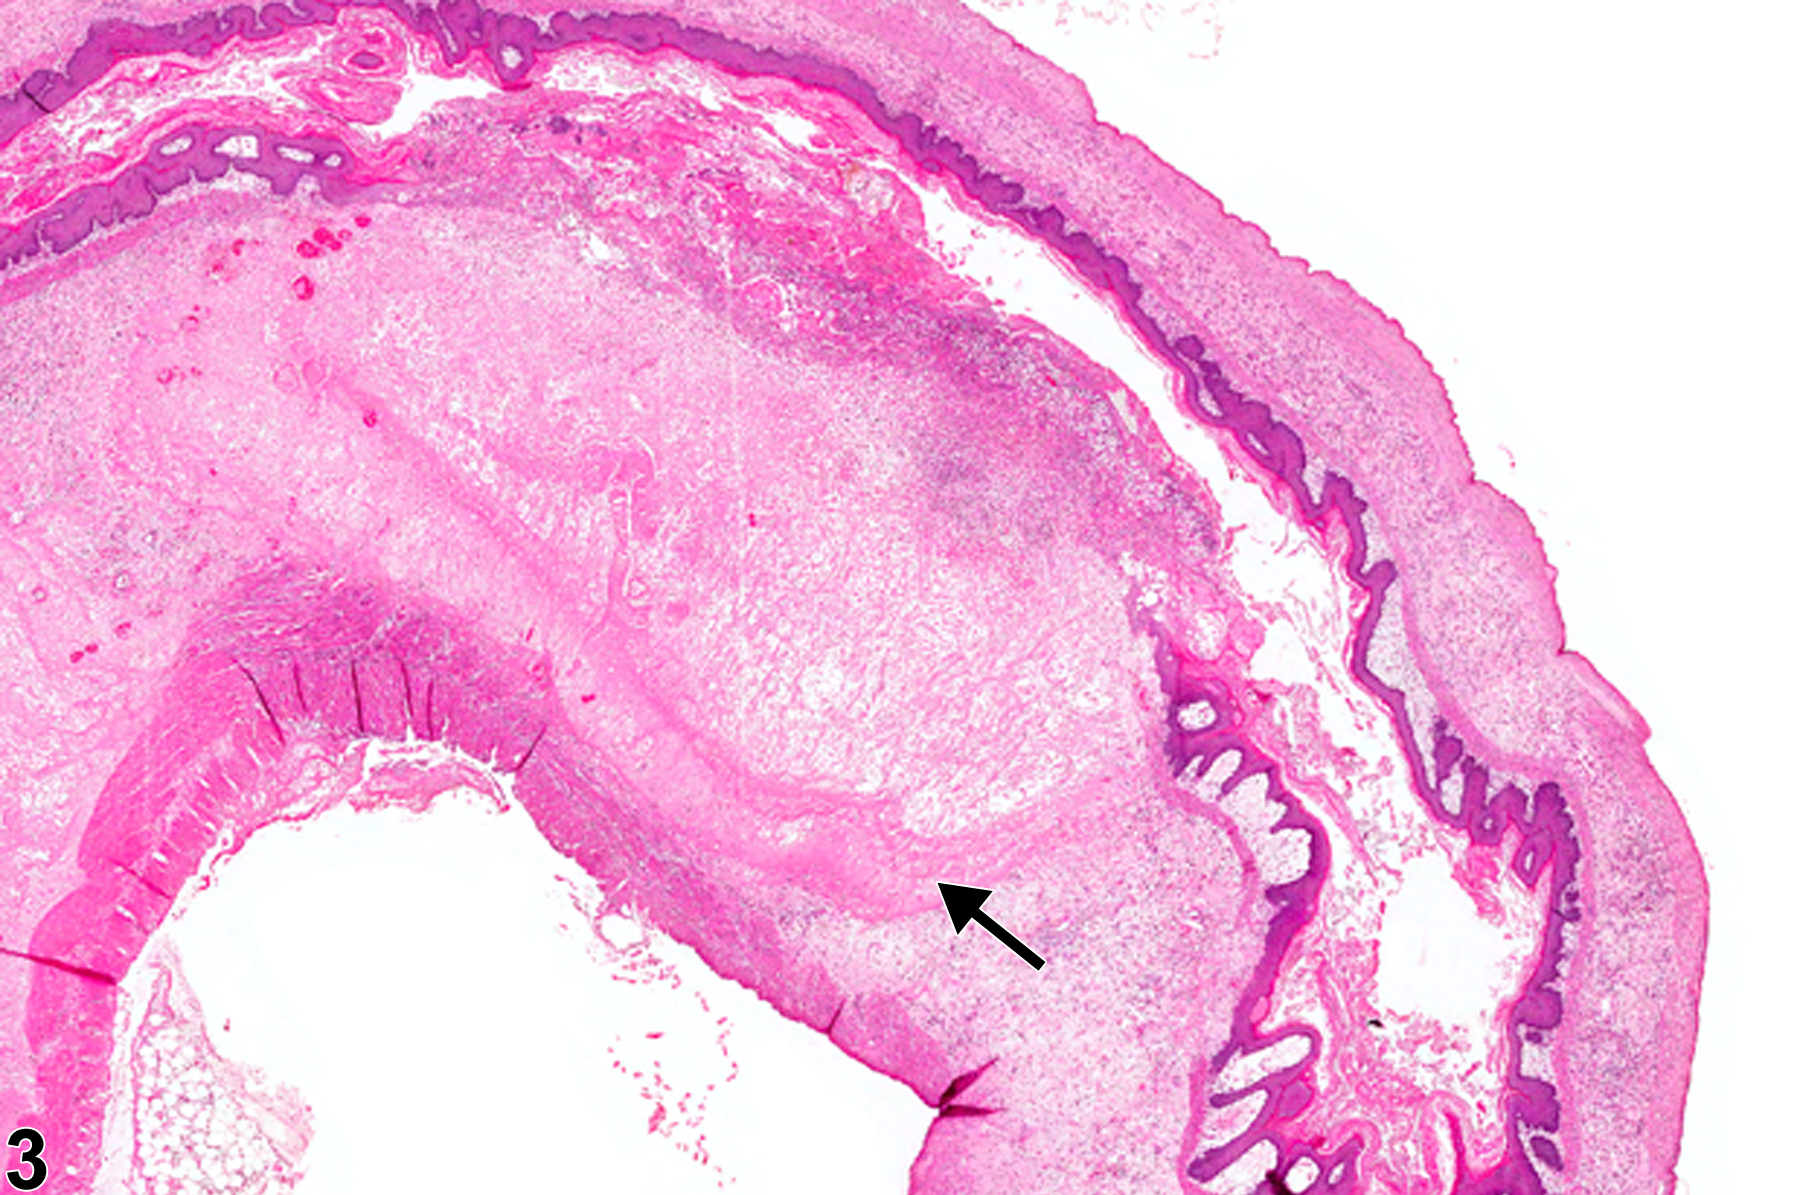 Image of necrosis in the forestomach from a male F344/N rat in a chronic study